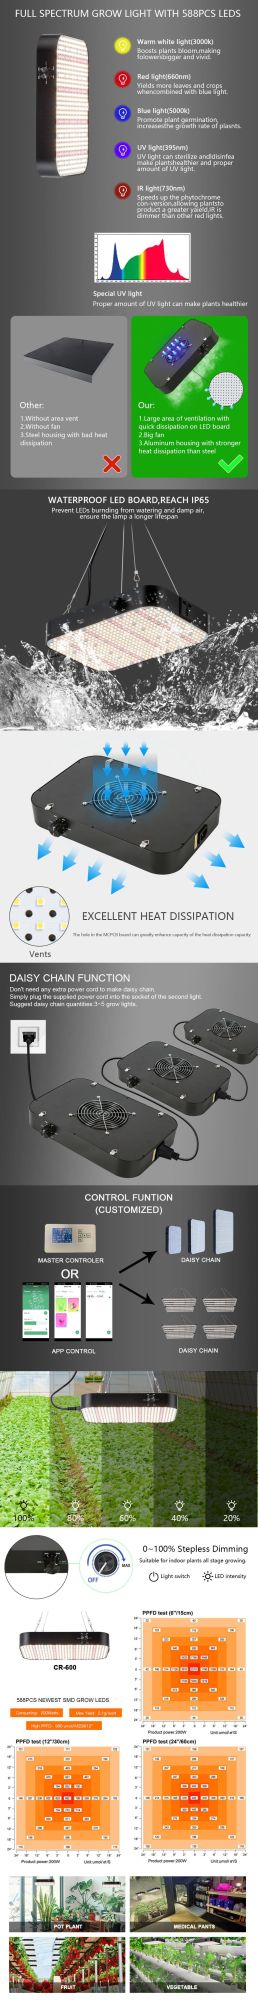 Samsung Strip Indoor Quantum High Power Horticulture Board Lamp Full Spectrum Growing Plant Wholesale LED Plants Low Lighting